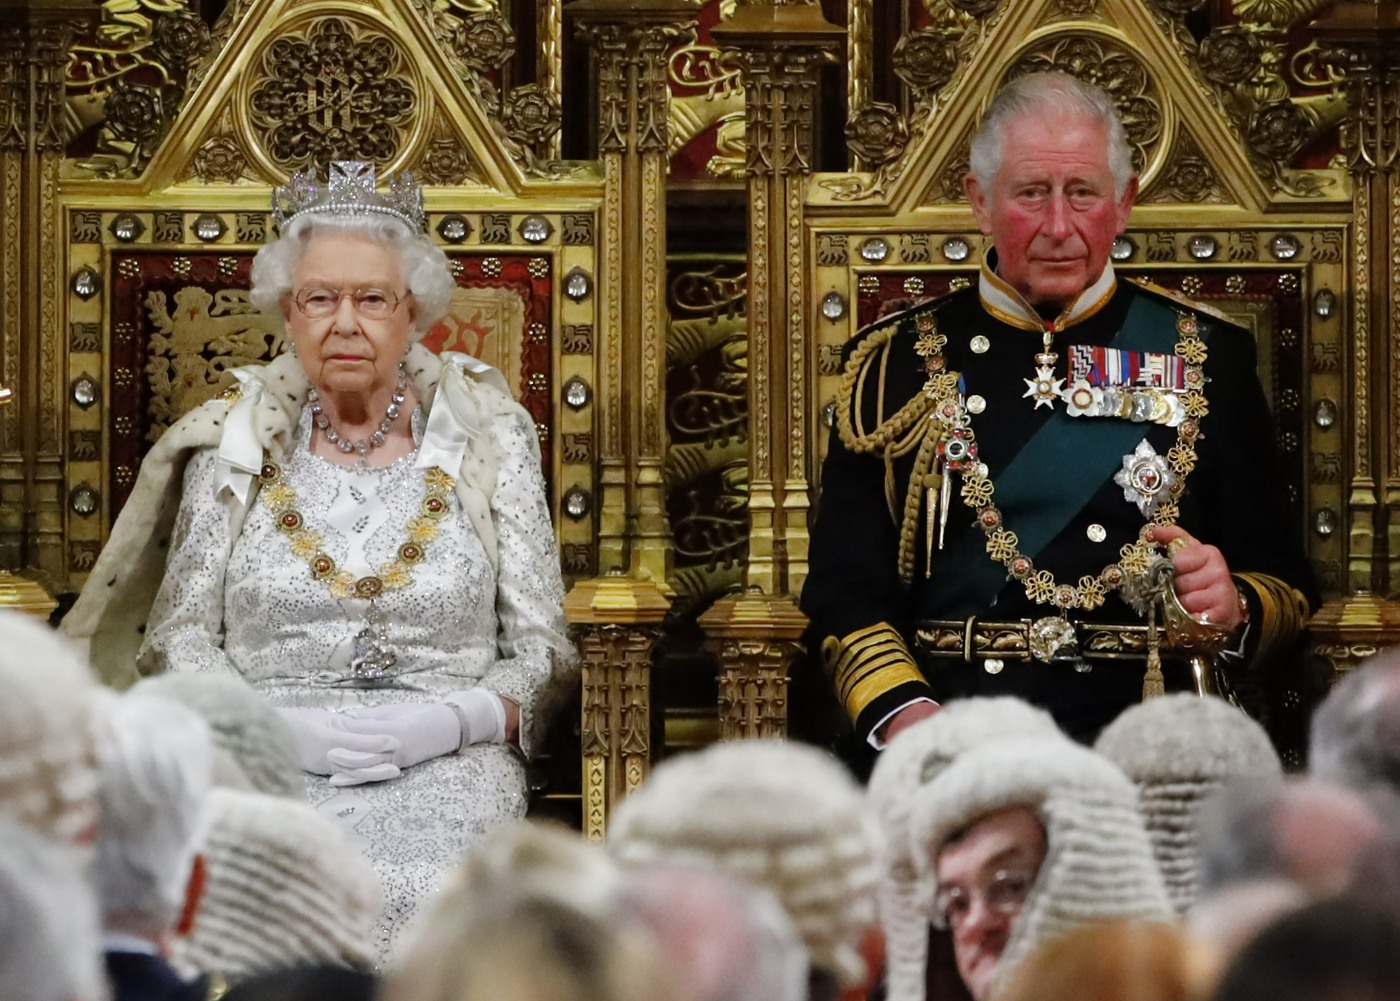 Andrew Morton: Queen Elizabeth’s reign is ‘effectively over’ because of the pandemic